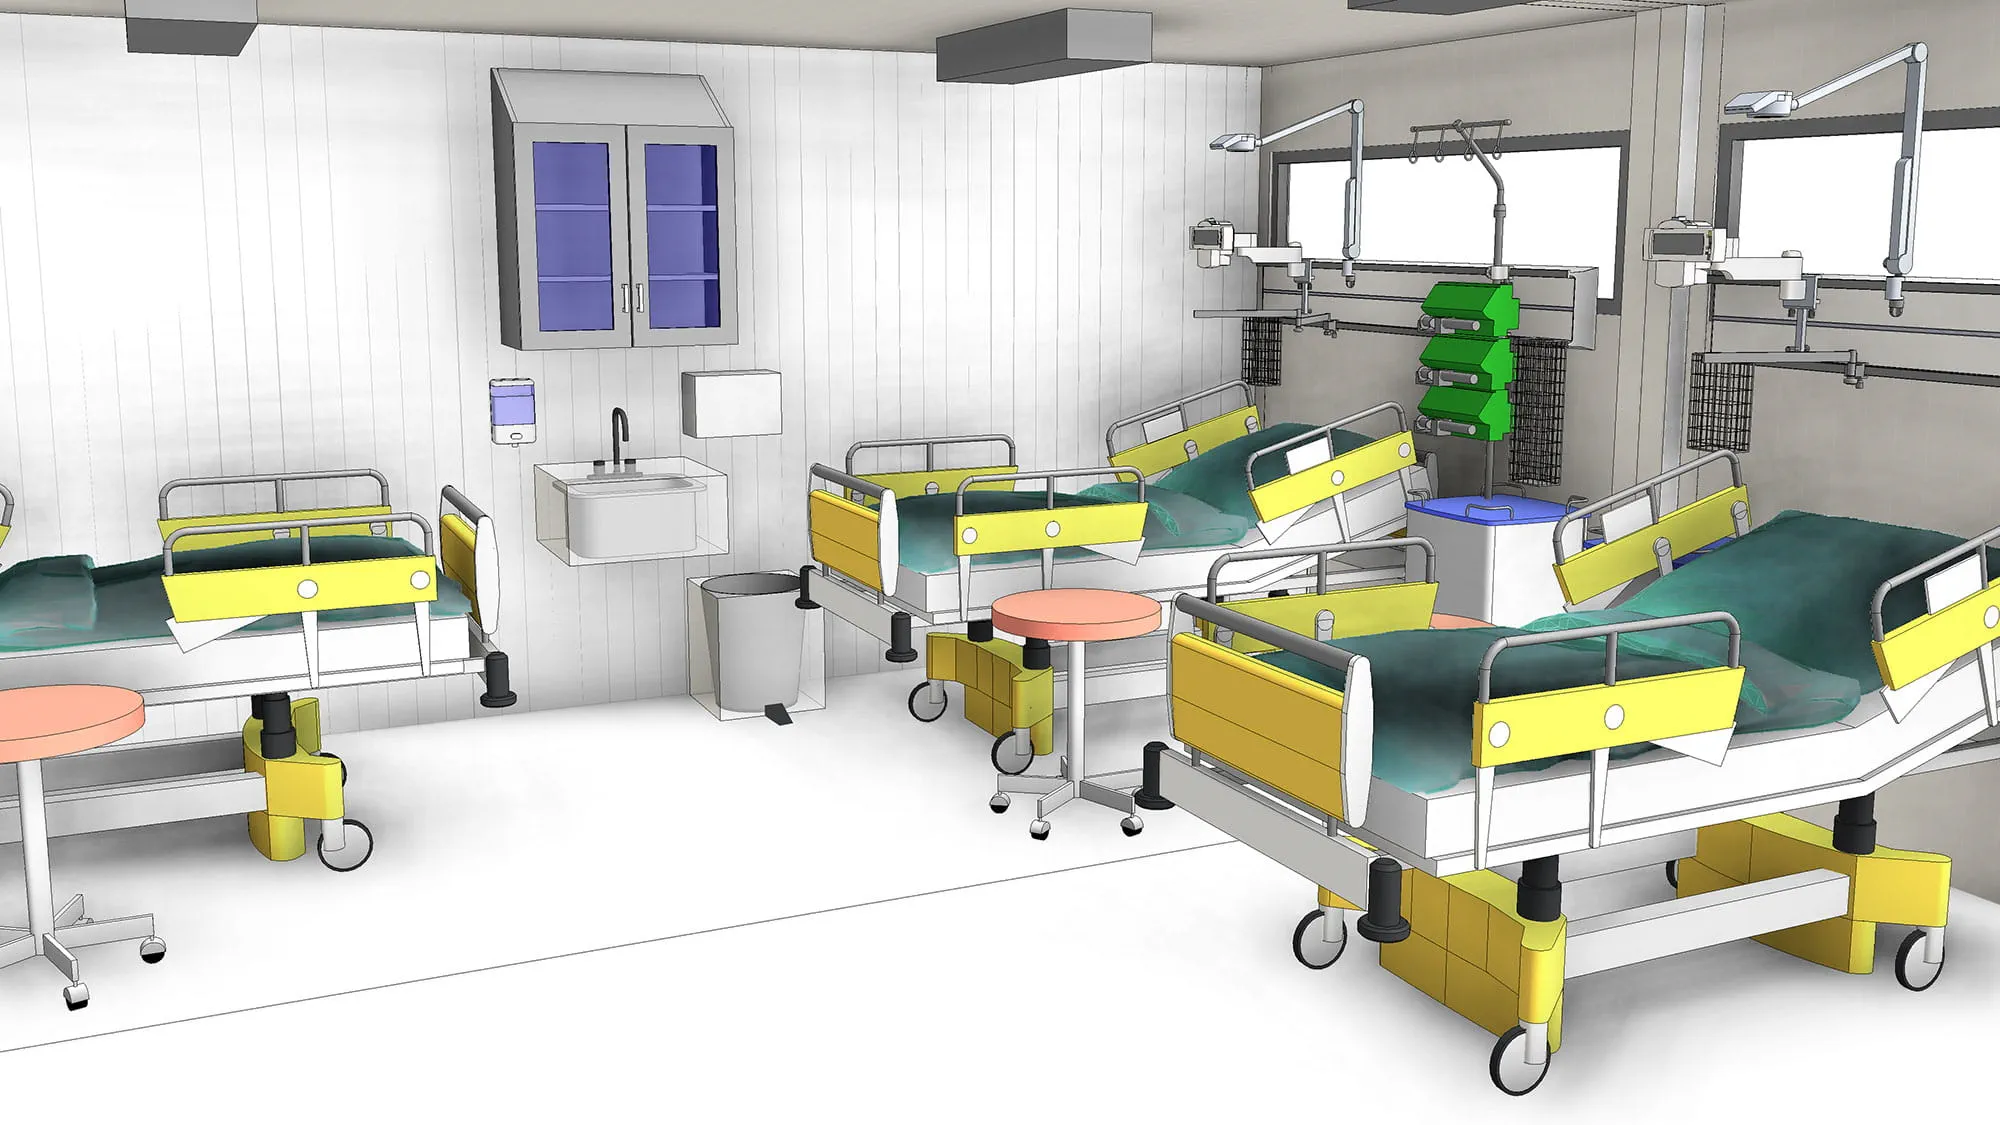 The ‘plug-in’ hospital: This is a ready-to-use, modular designed, field hospital that can be attached to existing healthcare infrastructure. 